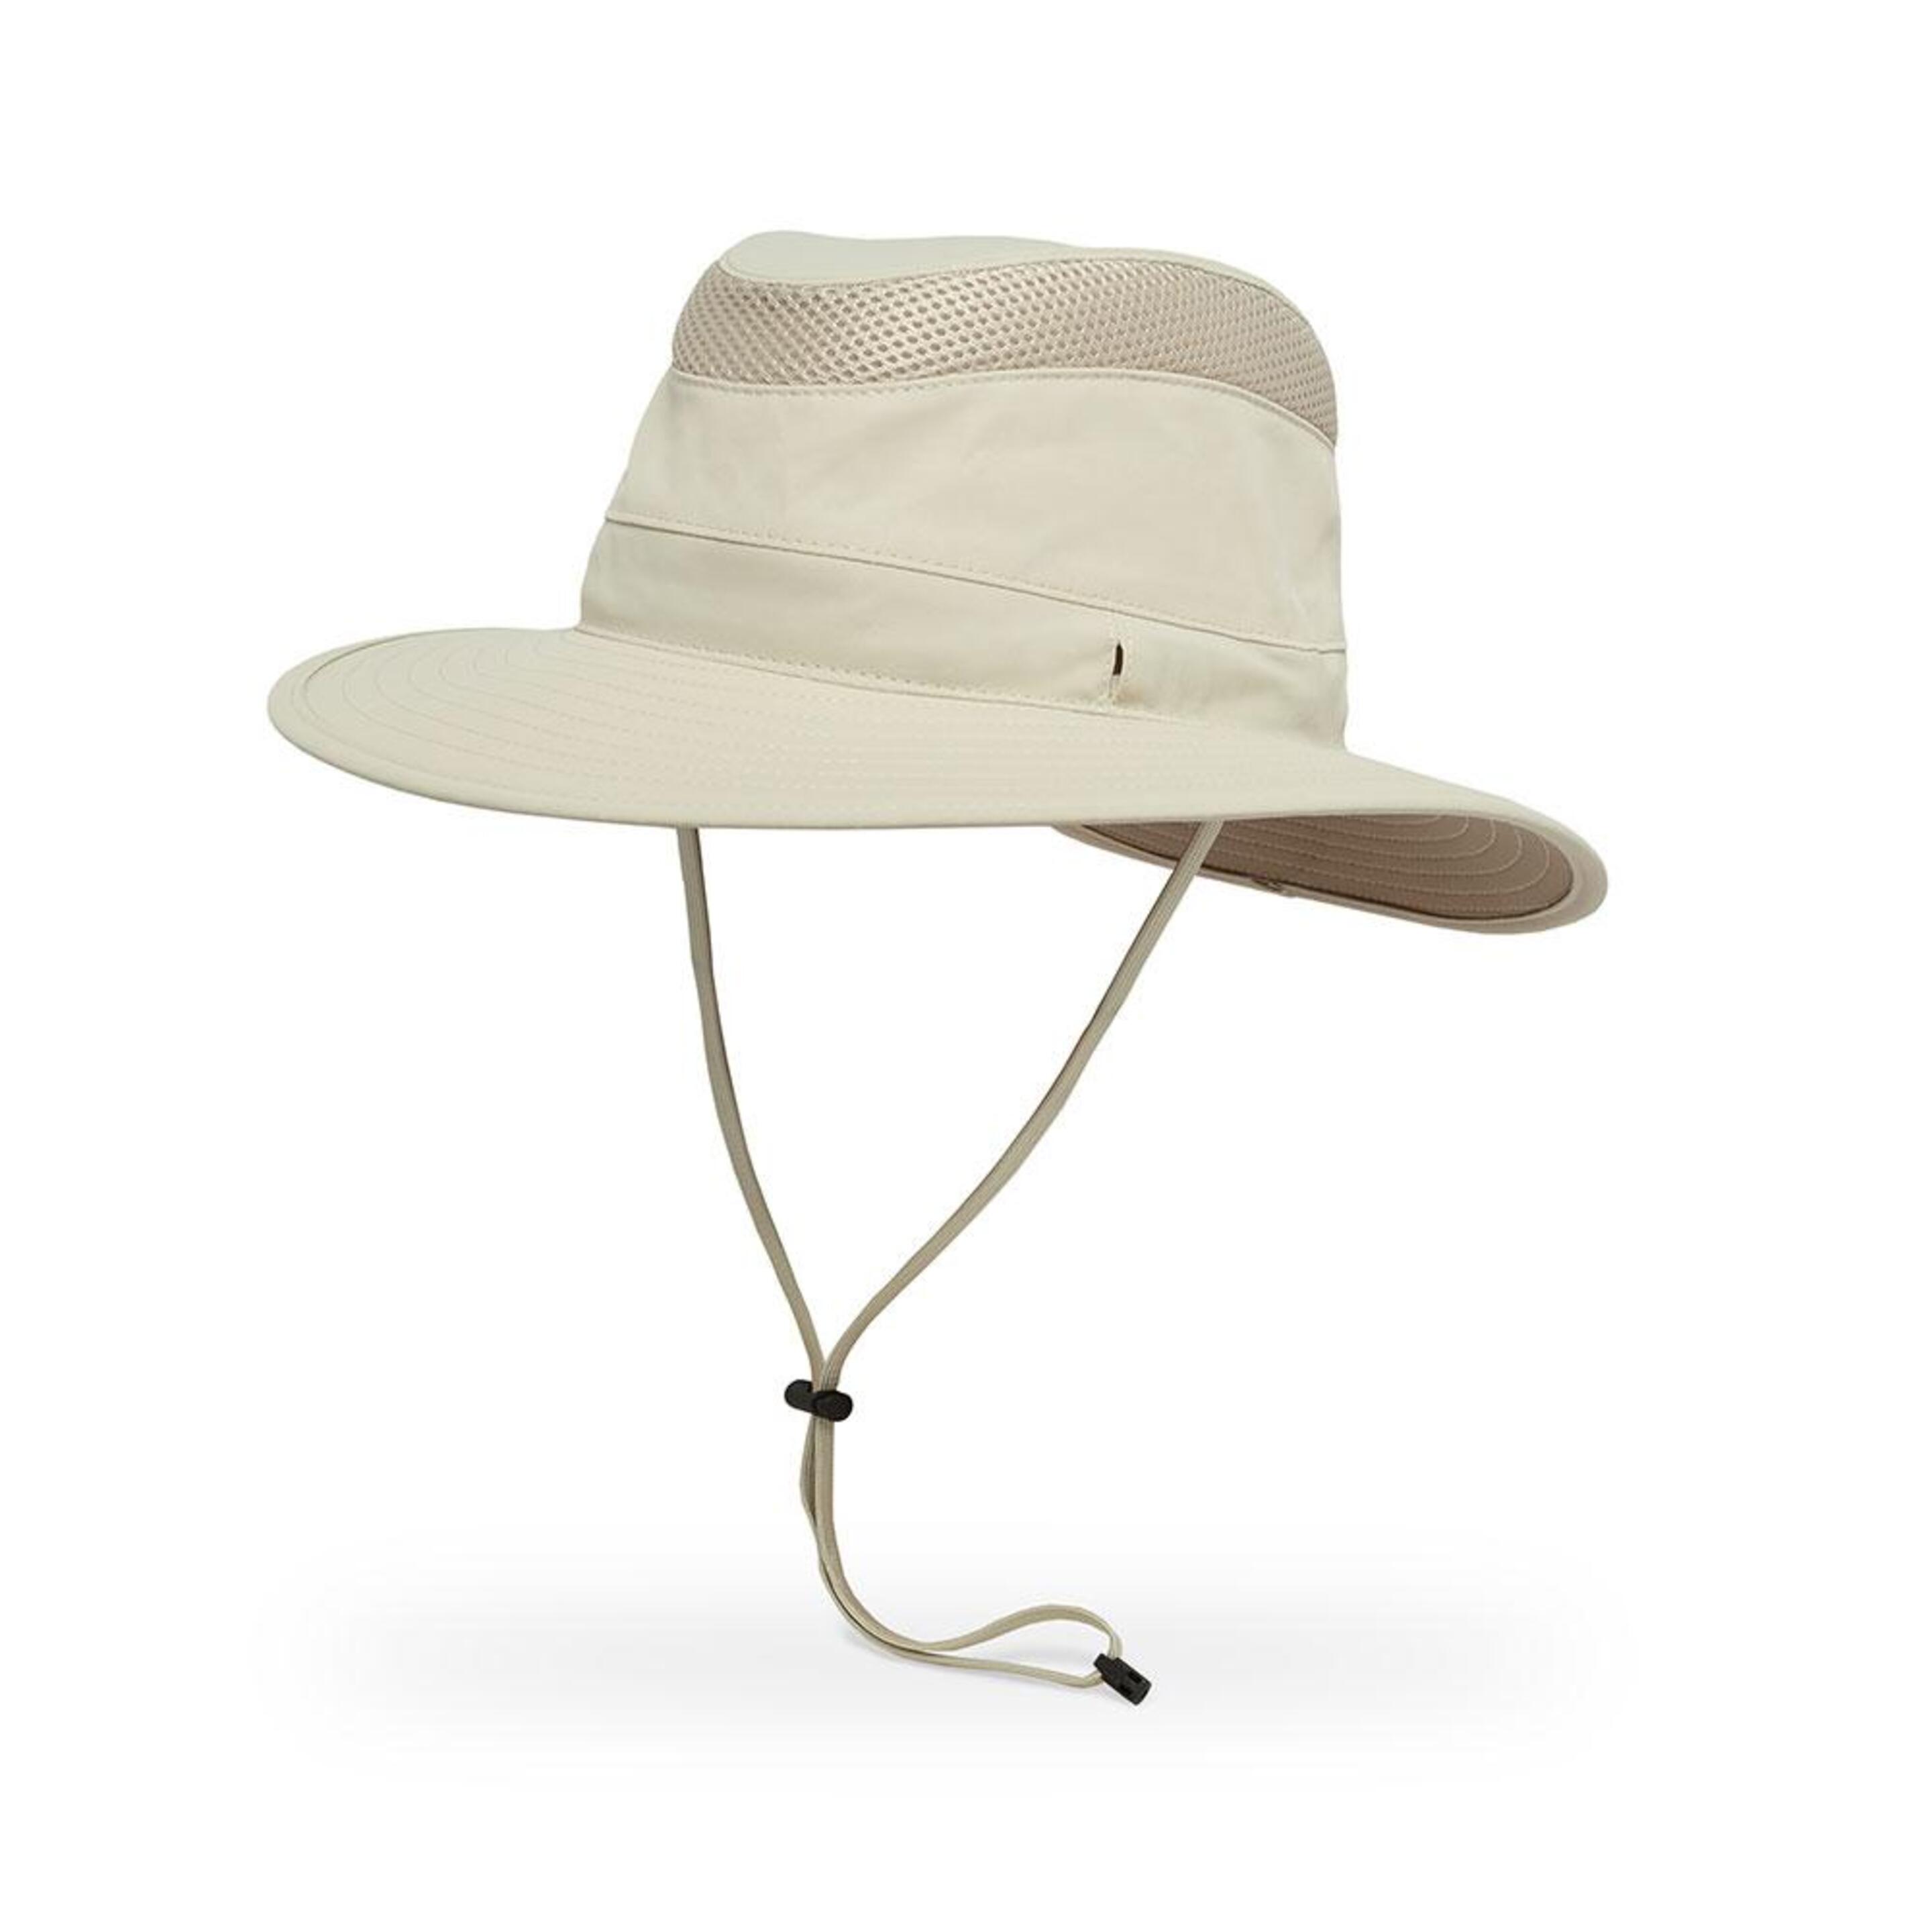 Sombrero Charter Sunday Afternoons Upf 50+ - beige - 